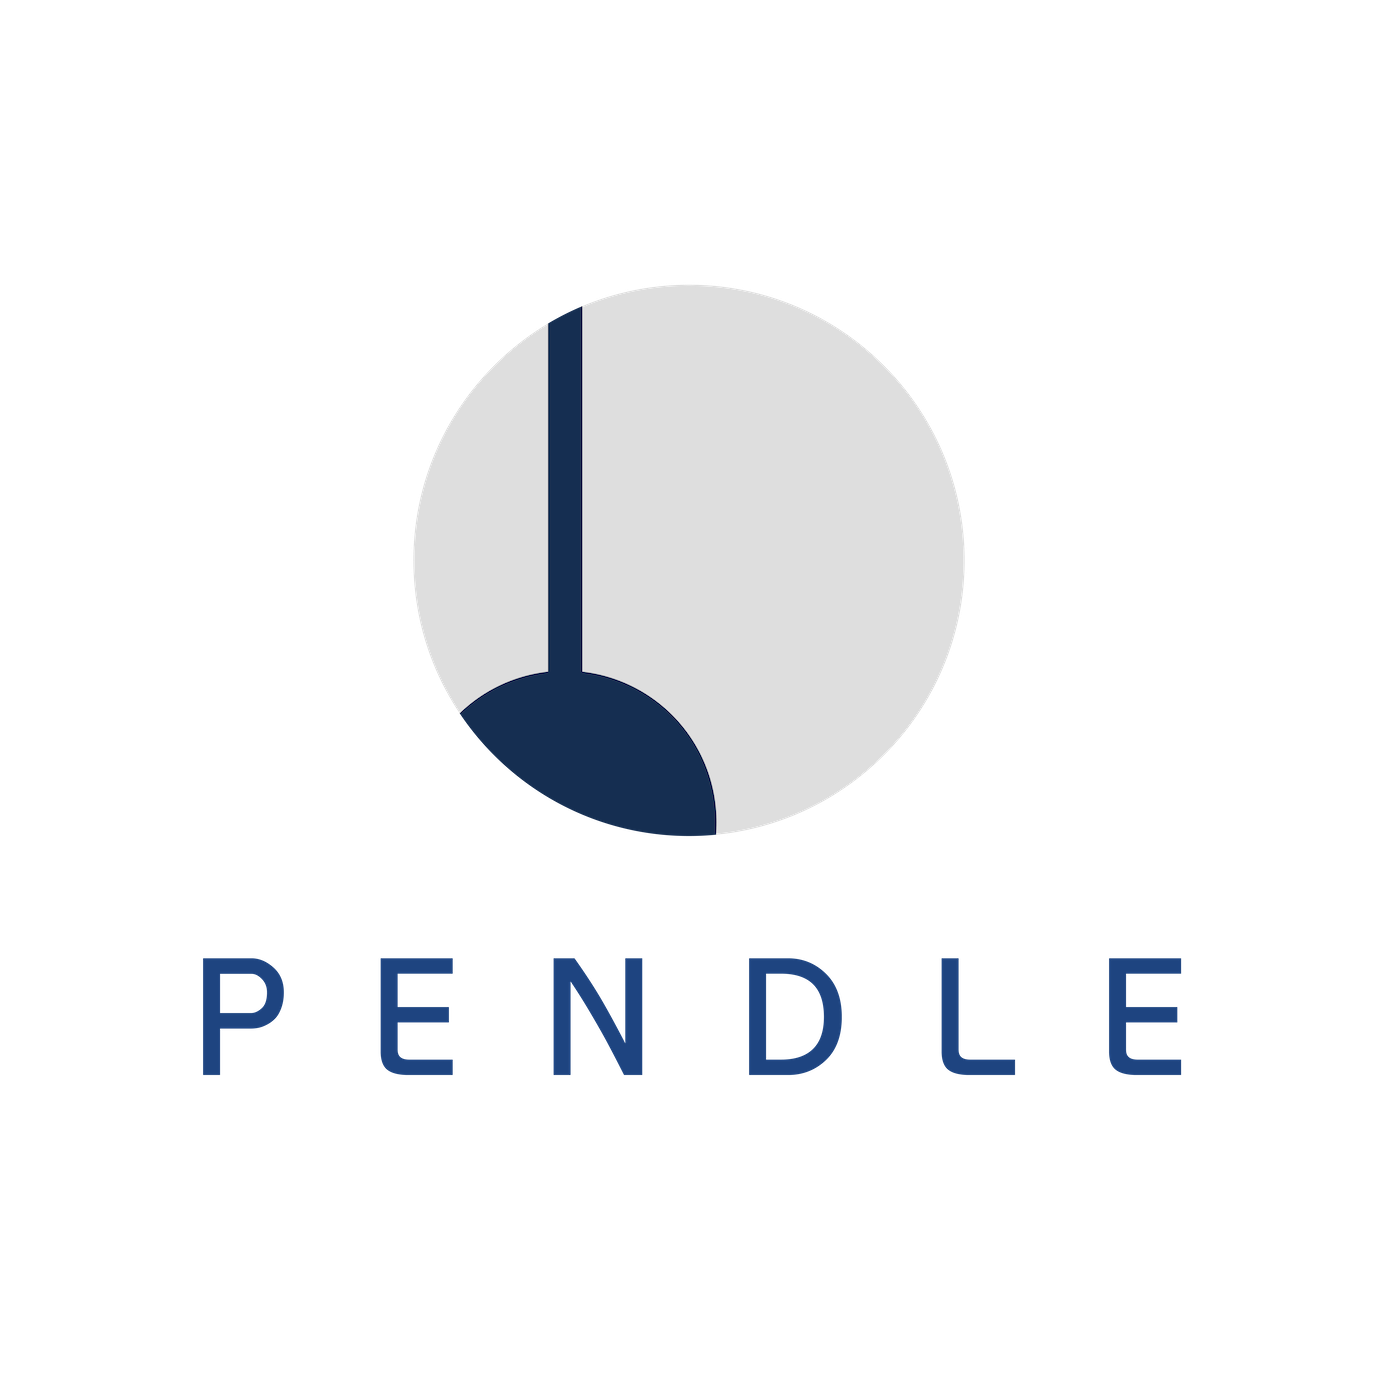 Cover Image for Pendle Finance